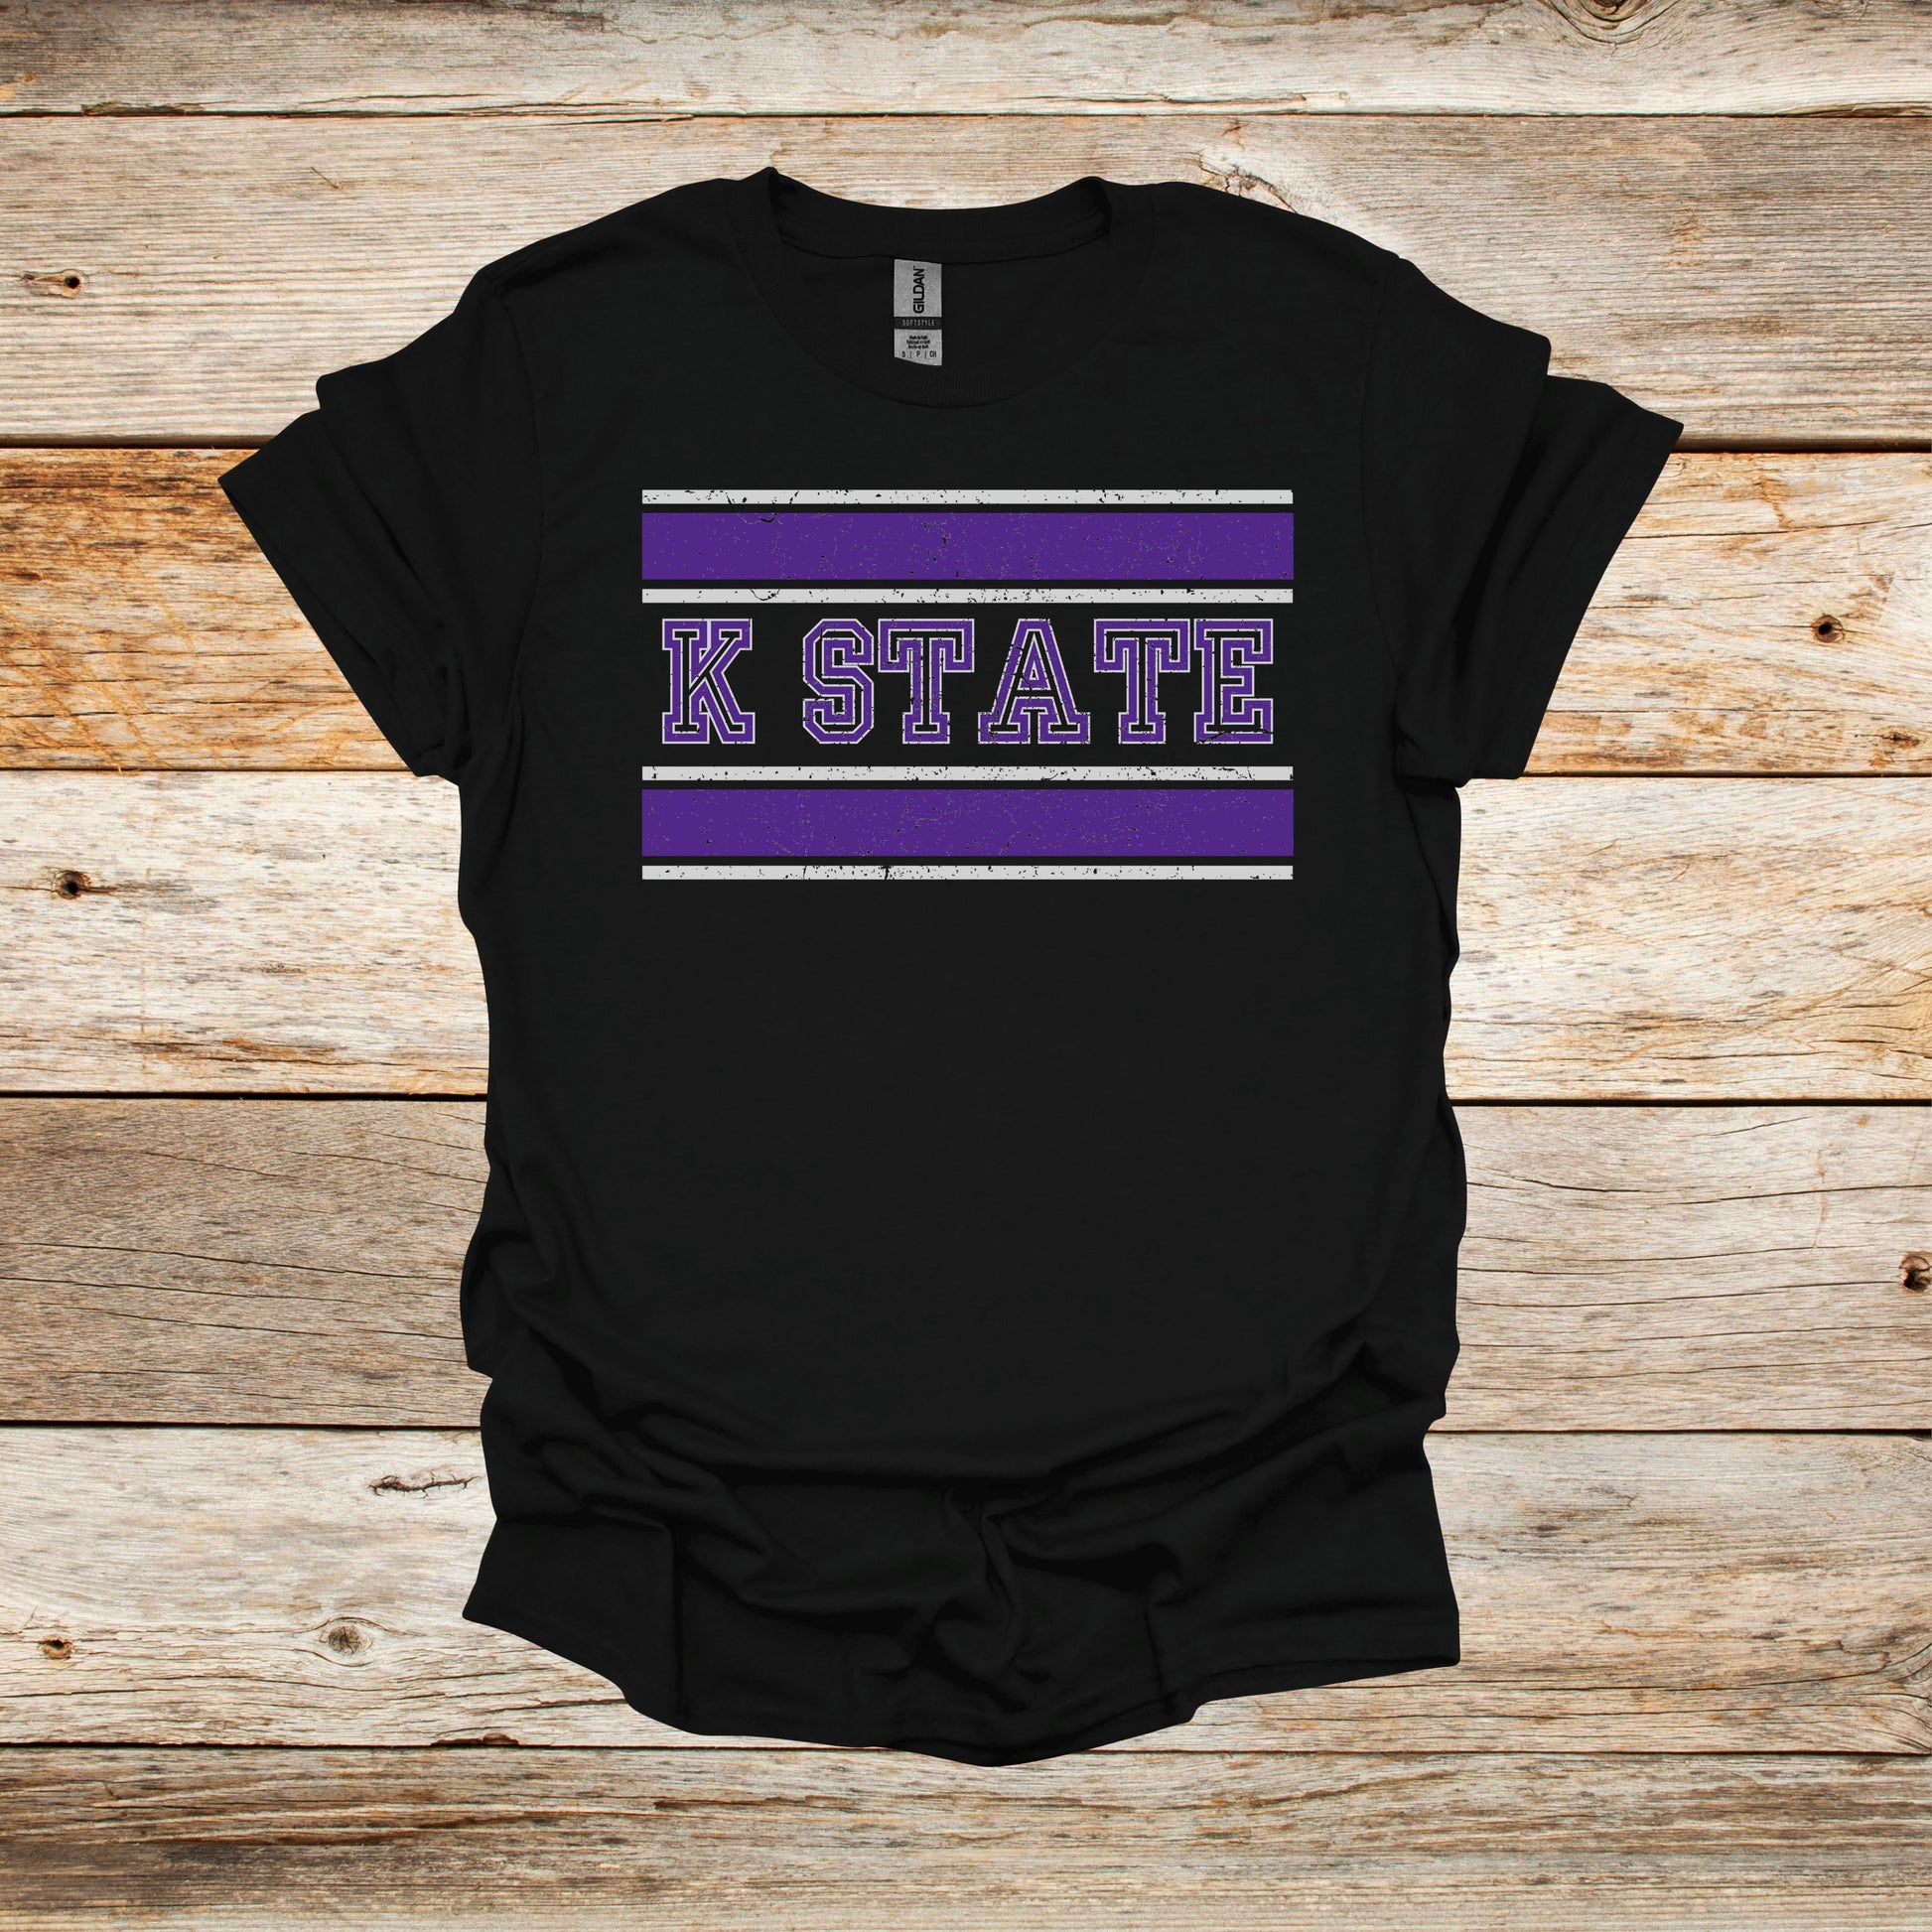 College T Shirt - Kansas State Wildcats - Adult and Children's Tee Shirts T-Shirts Graphic Avenue Black Adult Small 